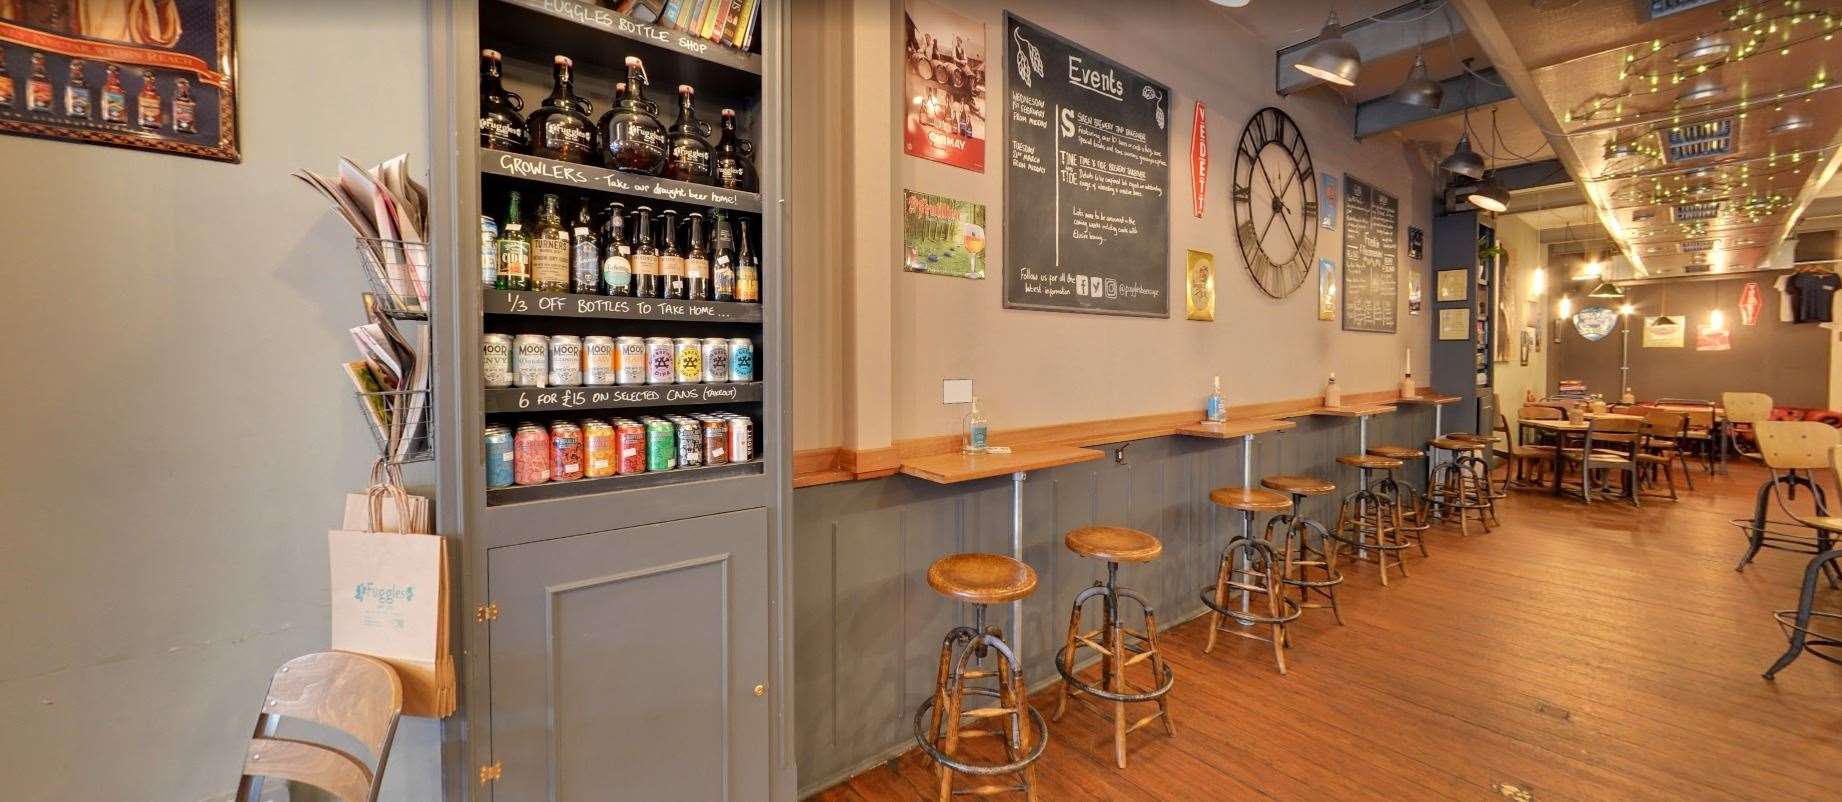 Fuggles Beer Cafe and Bottle Shop in Tunbridge Wells. Picture: Google Maps